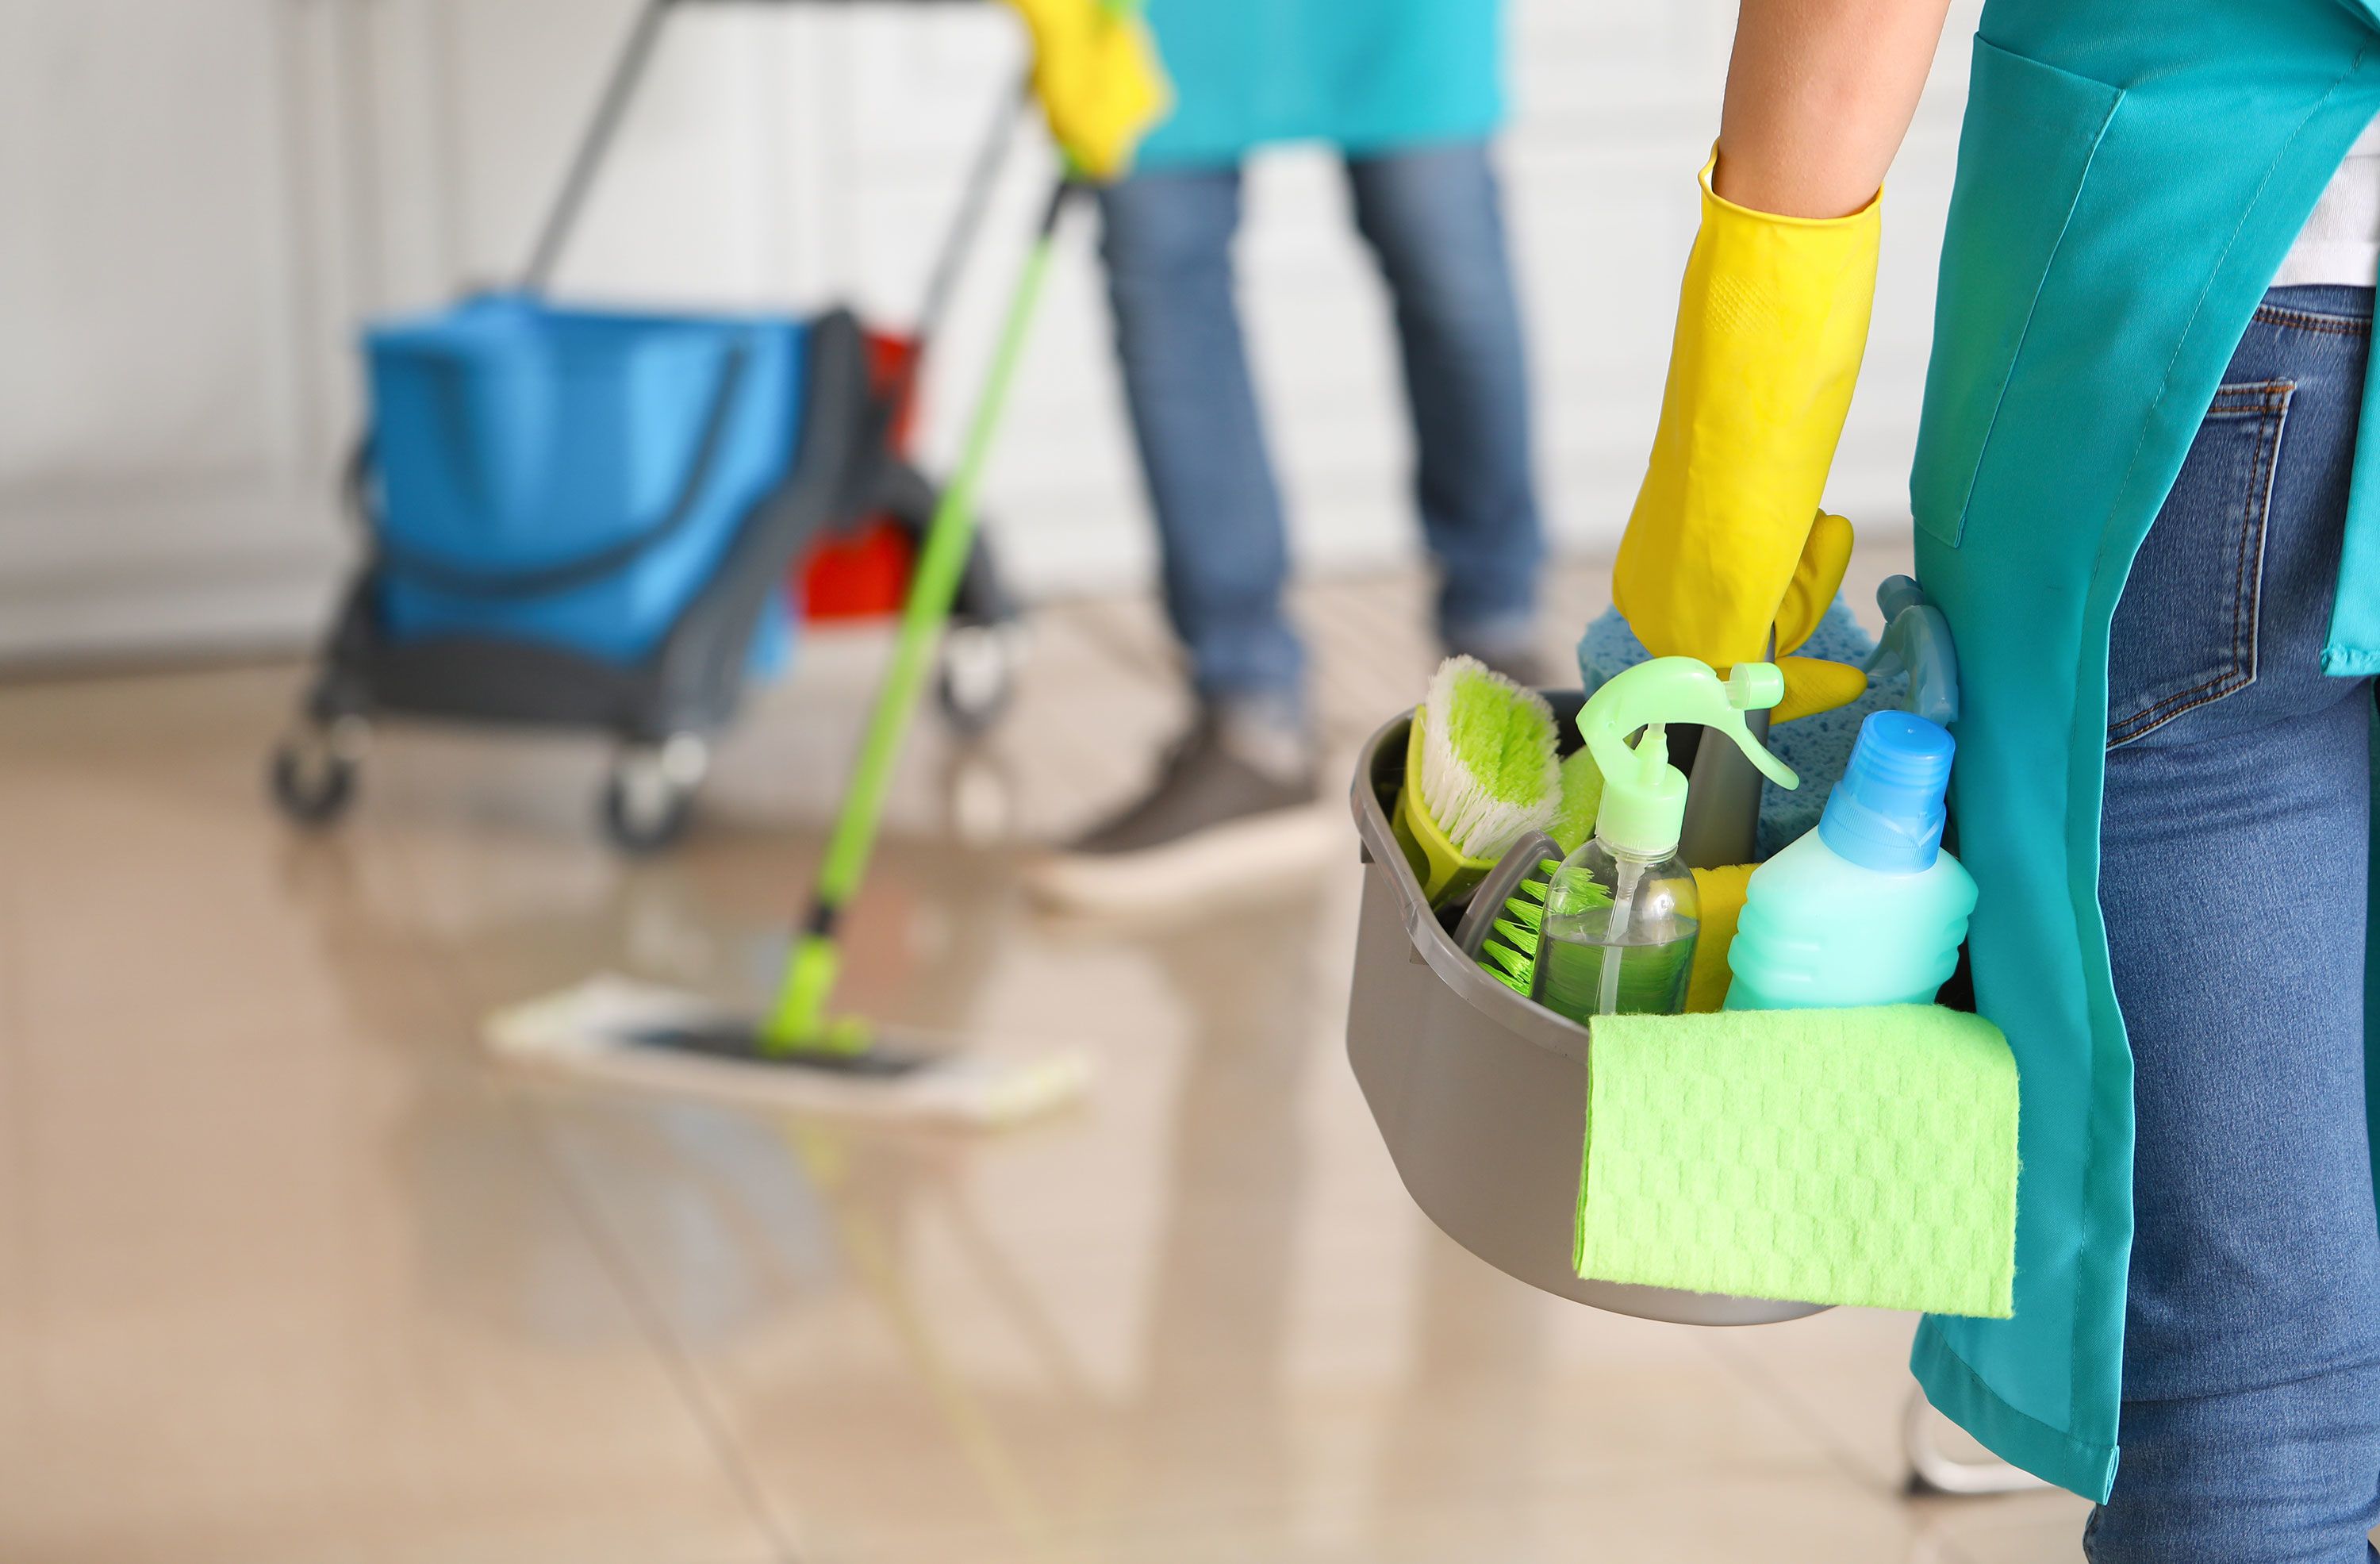 The coronavirus pandemic has been catastrophic for house cleaners and  nannies